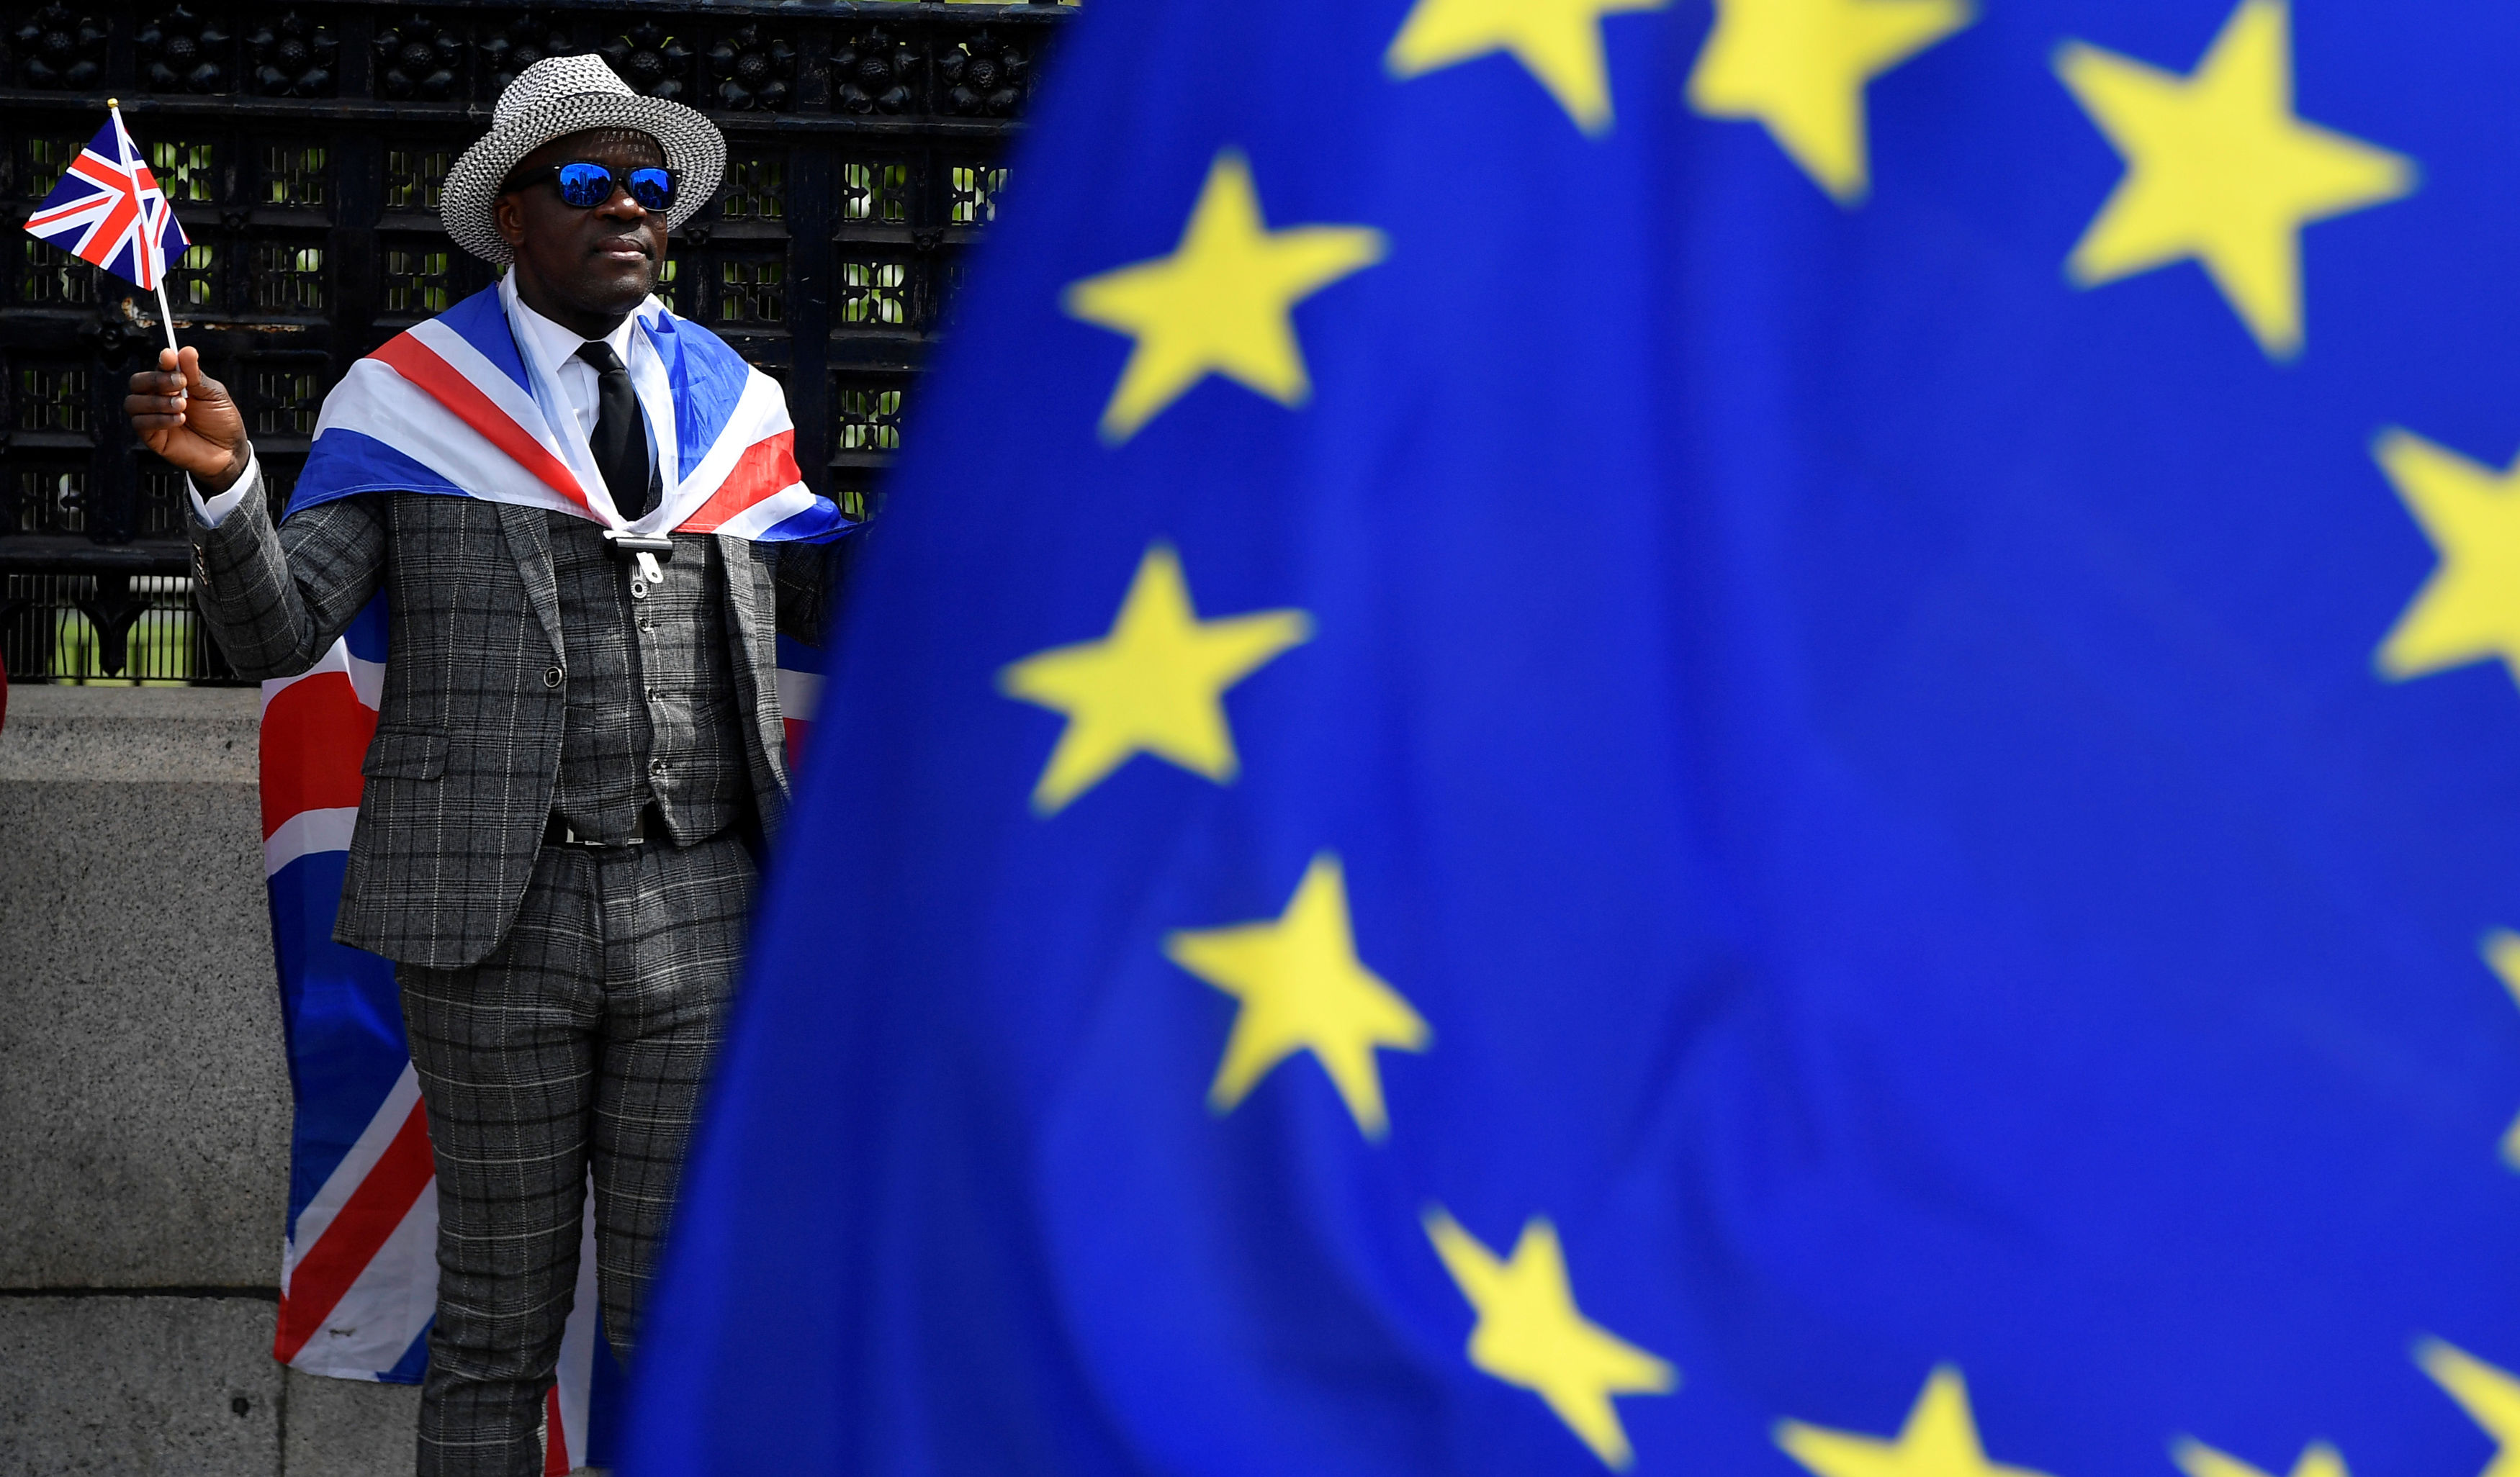 A pro-Brexit protester stands behind an EU flag ahead of the forthcoming EU elections, outside of the Houses of Parliament in London